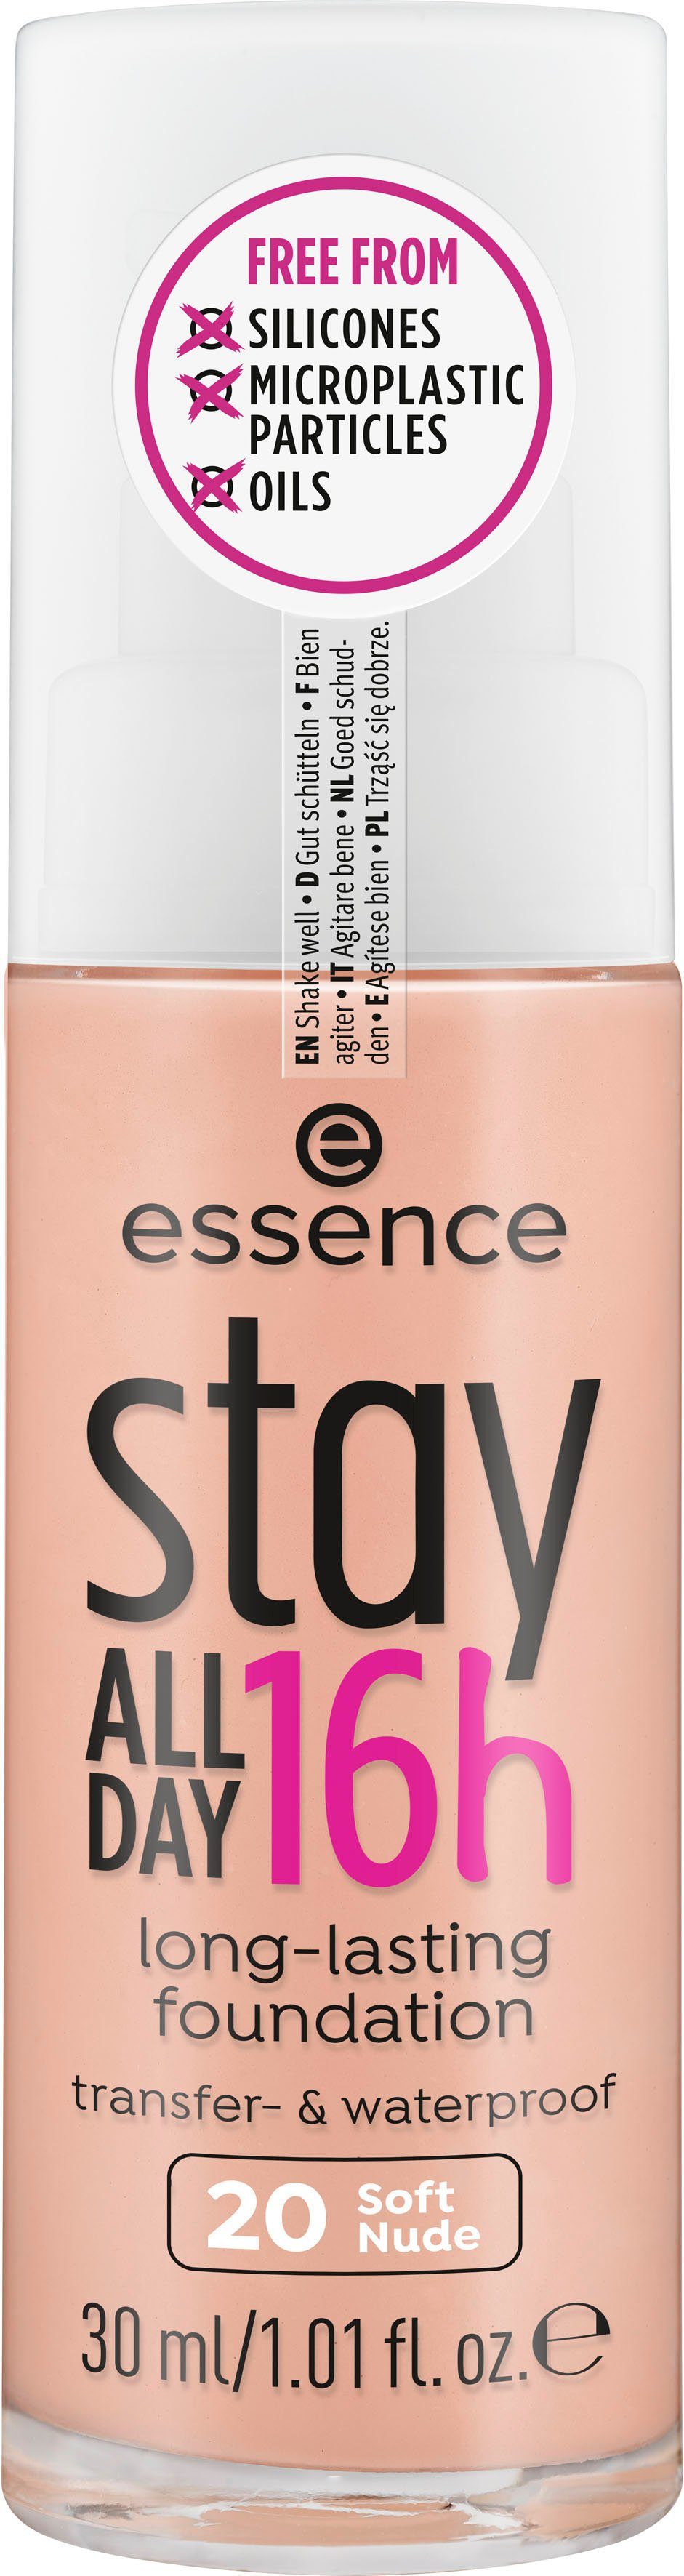 long-lasting, stay Foundation ALL Essence DAY 16h